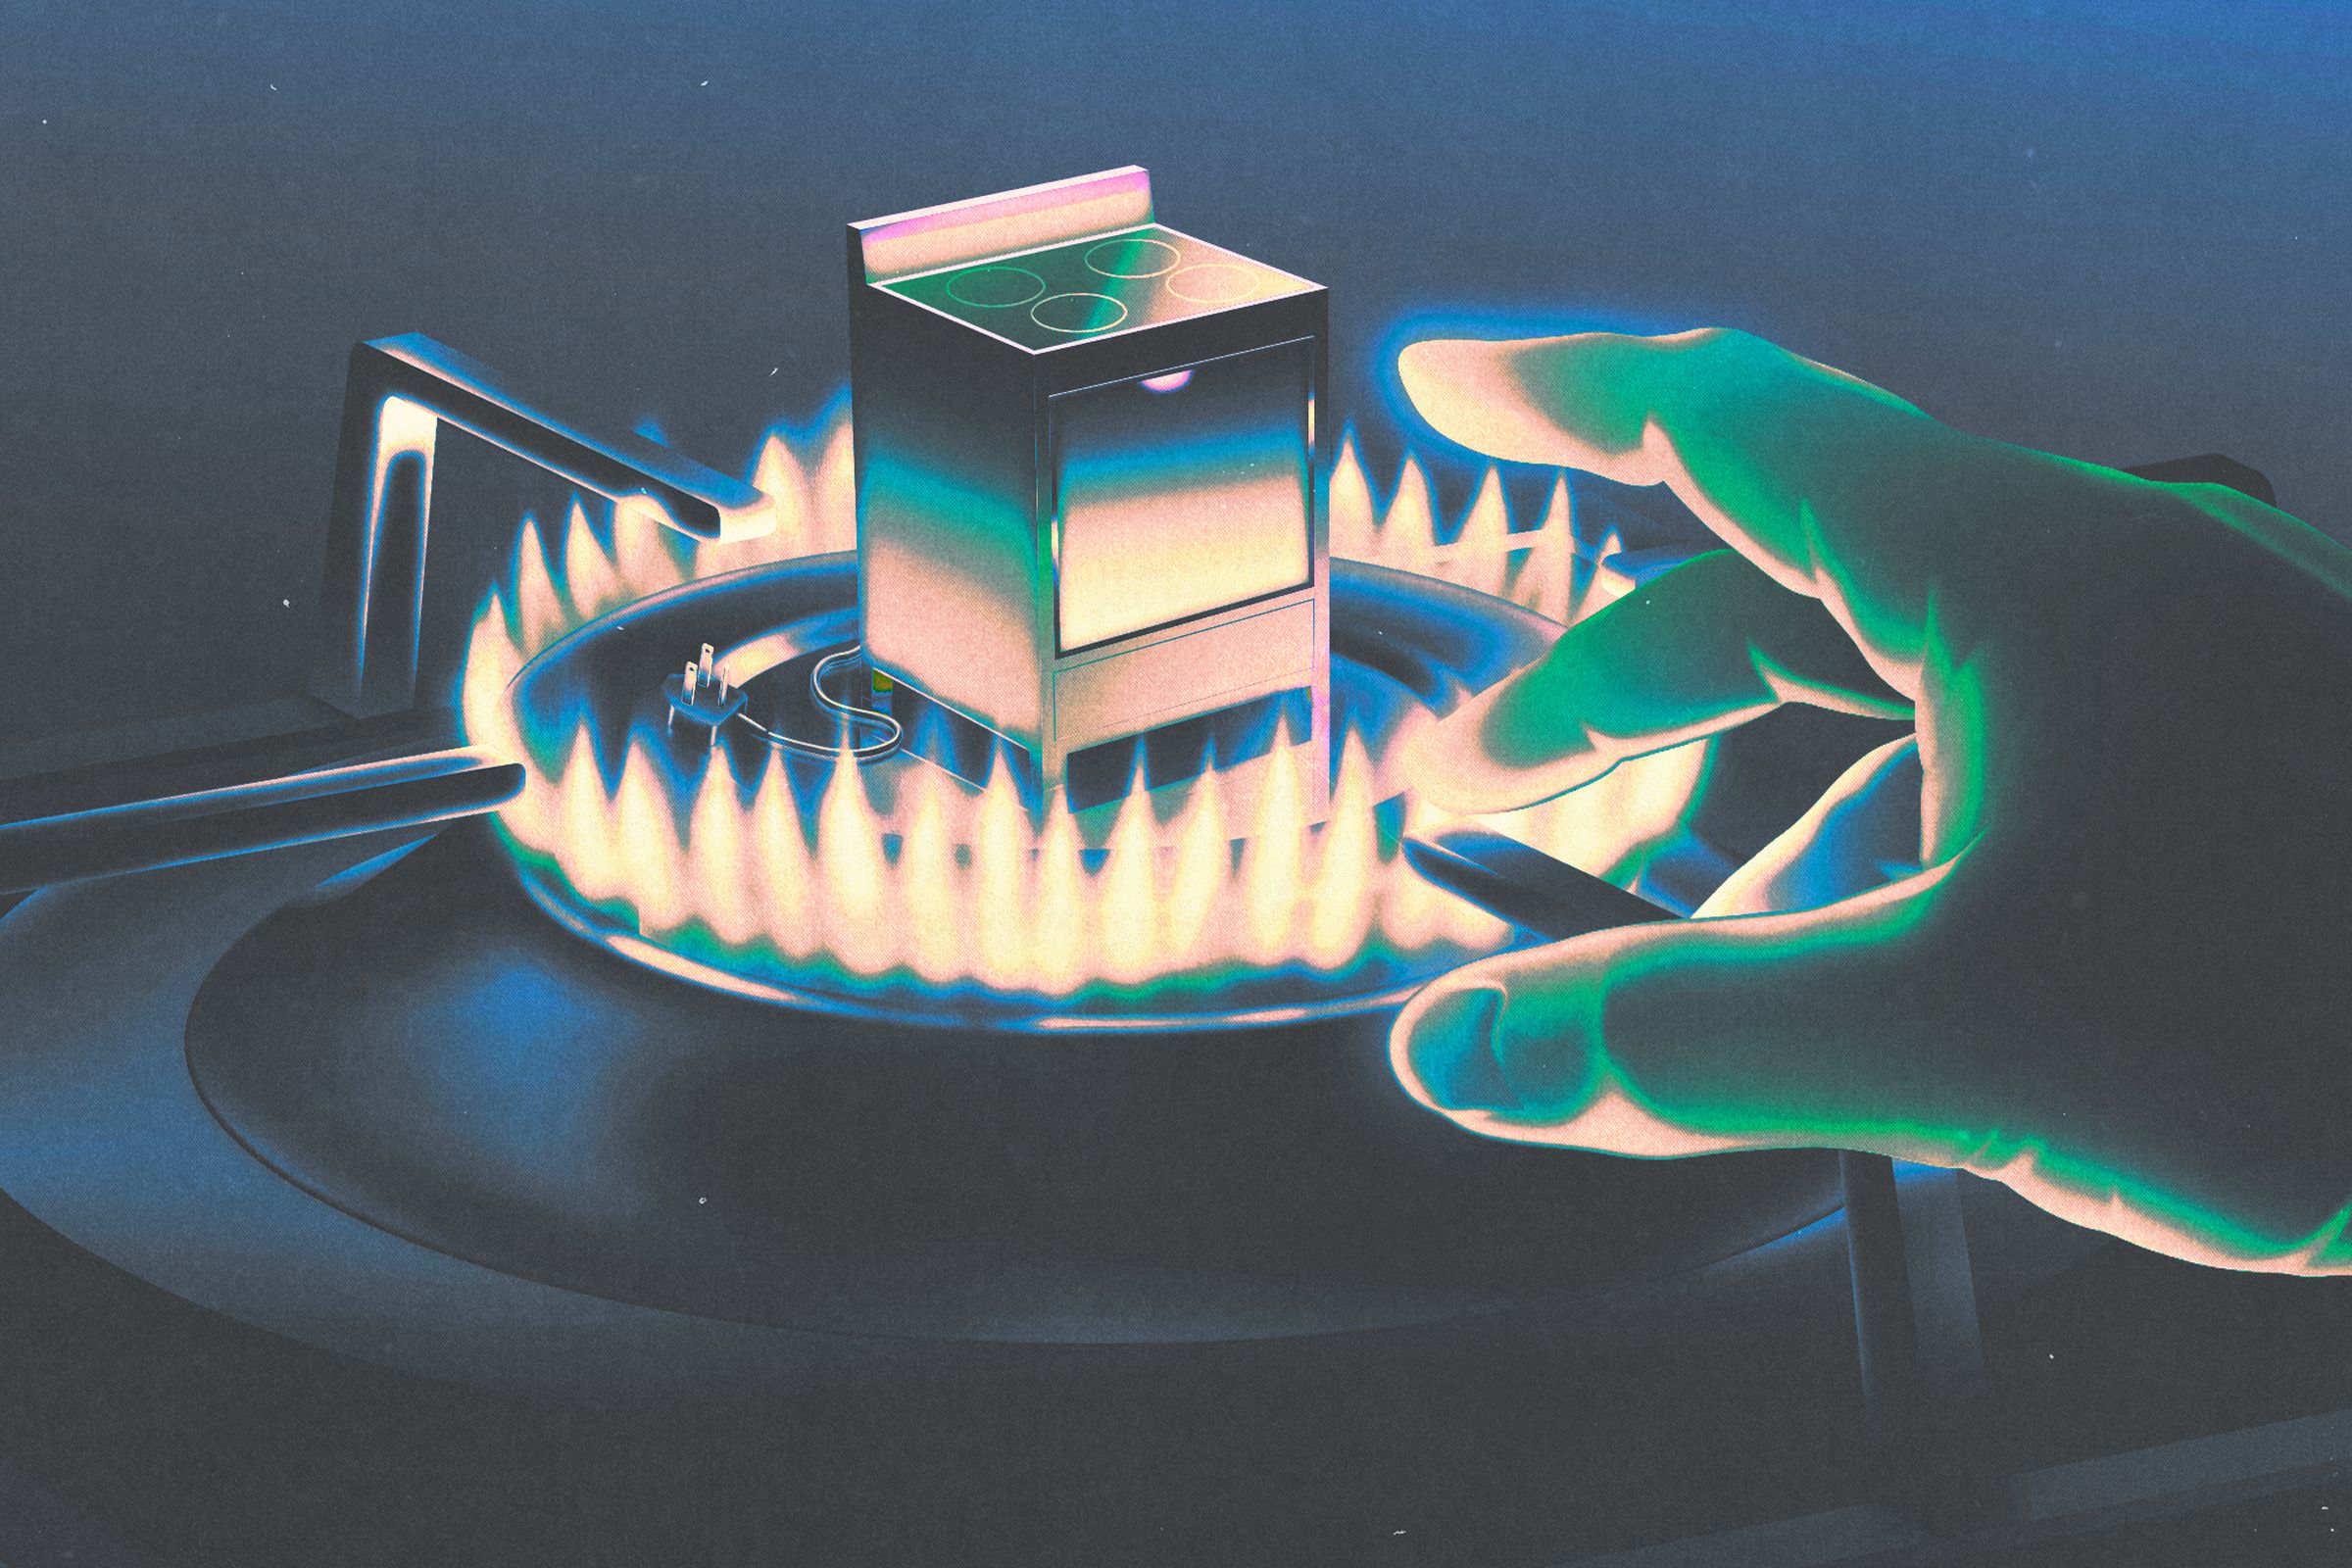 Conceptual illustration of a miniature electric stove within the confines of a lit gas burner. A hand is reaching for the electric stove but risks being burned by the flame. The image is intended to communicate the inaccessibility of electric appliances for renters.